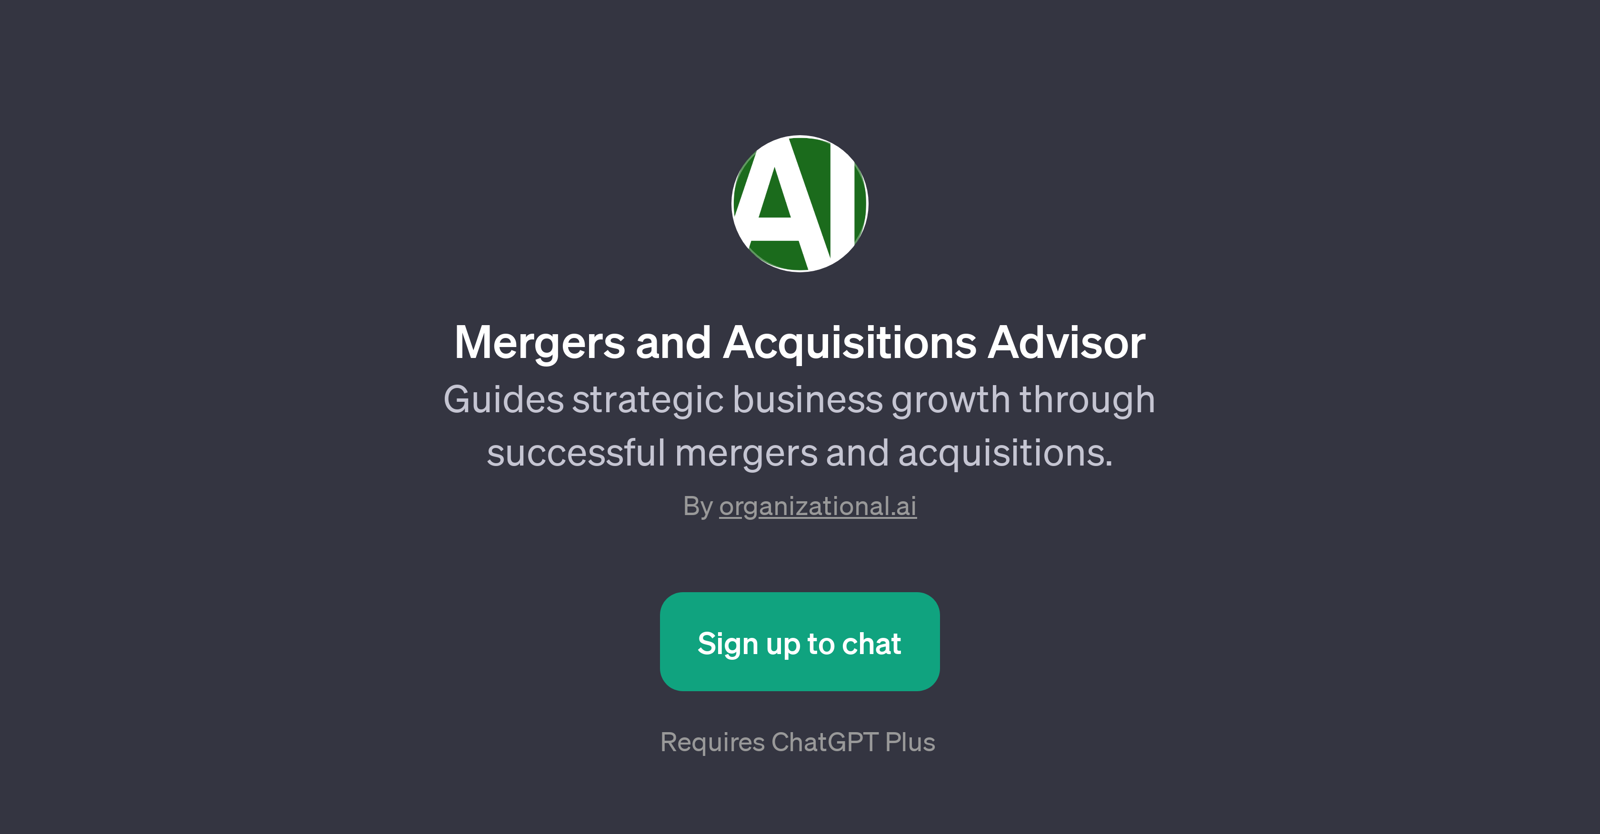 Mergers and Acquisitions Advisor website